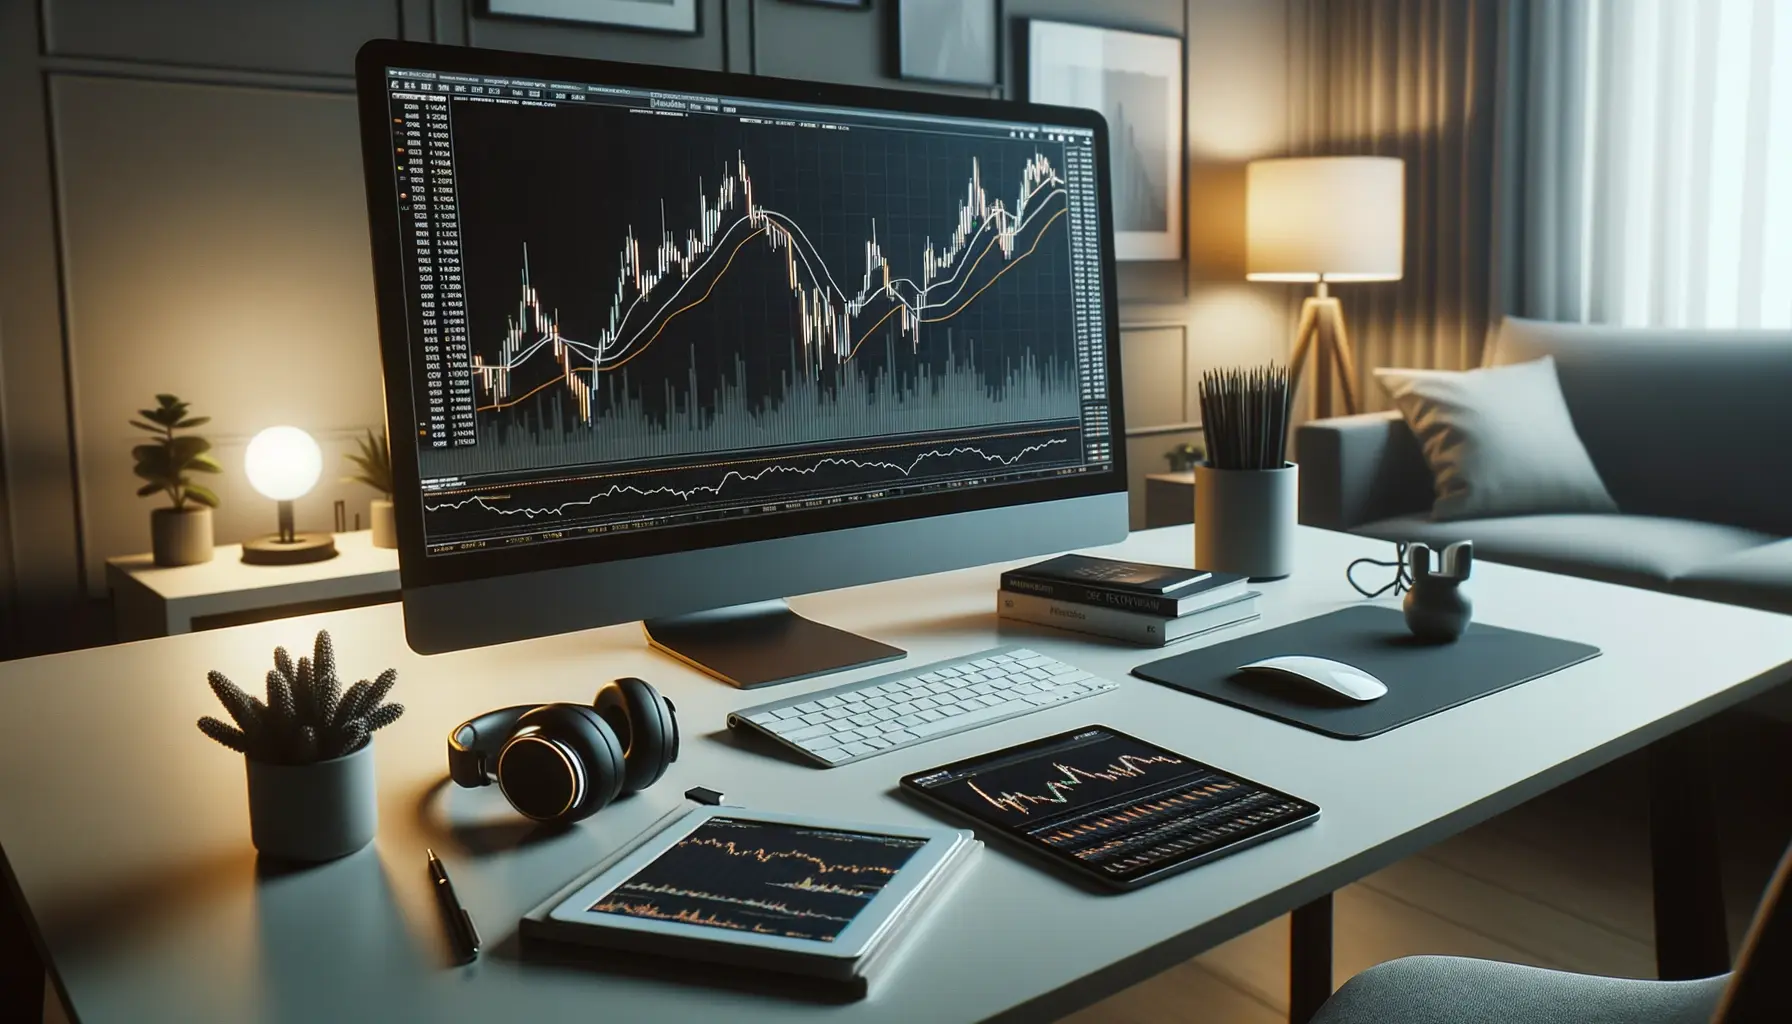 Clean and organized trading desk setup, creating a comfortable and inviting environment for learning how to install Sierra Chart.